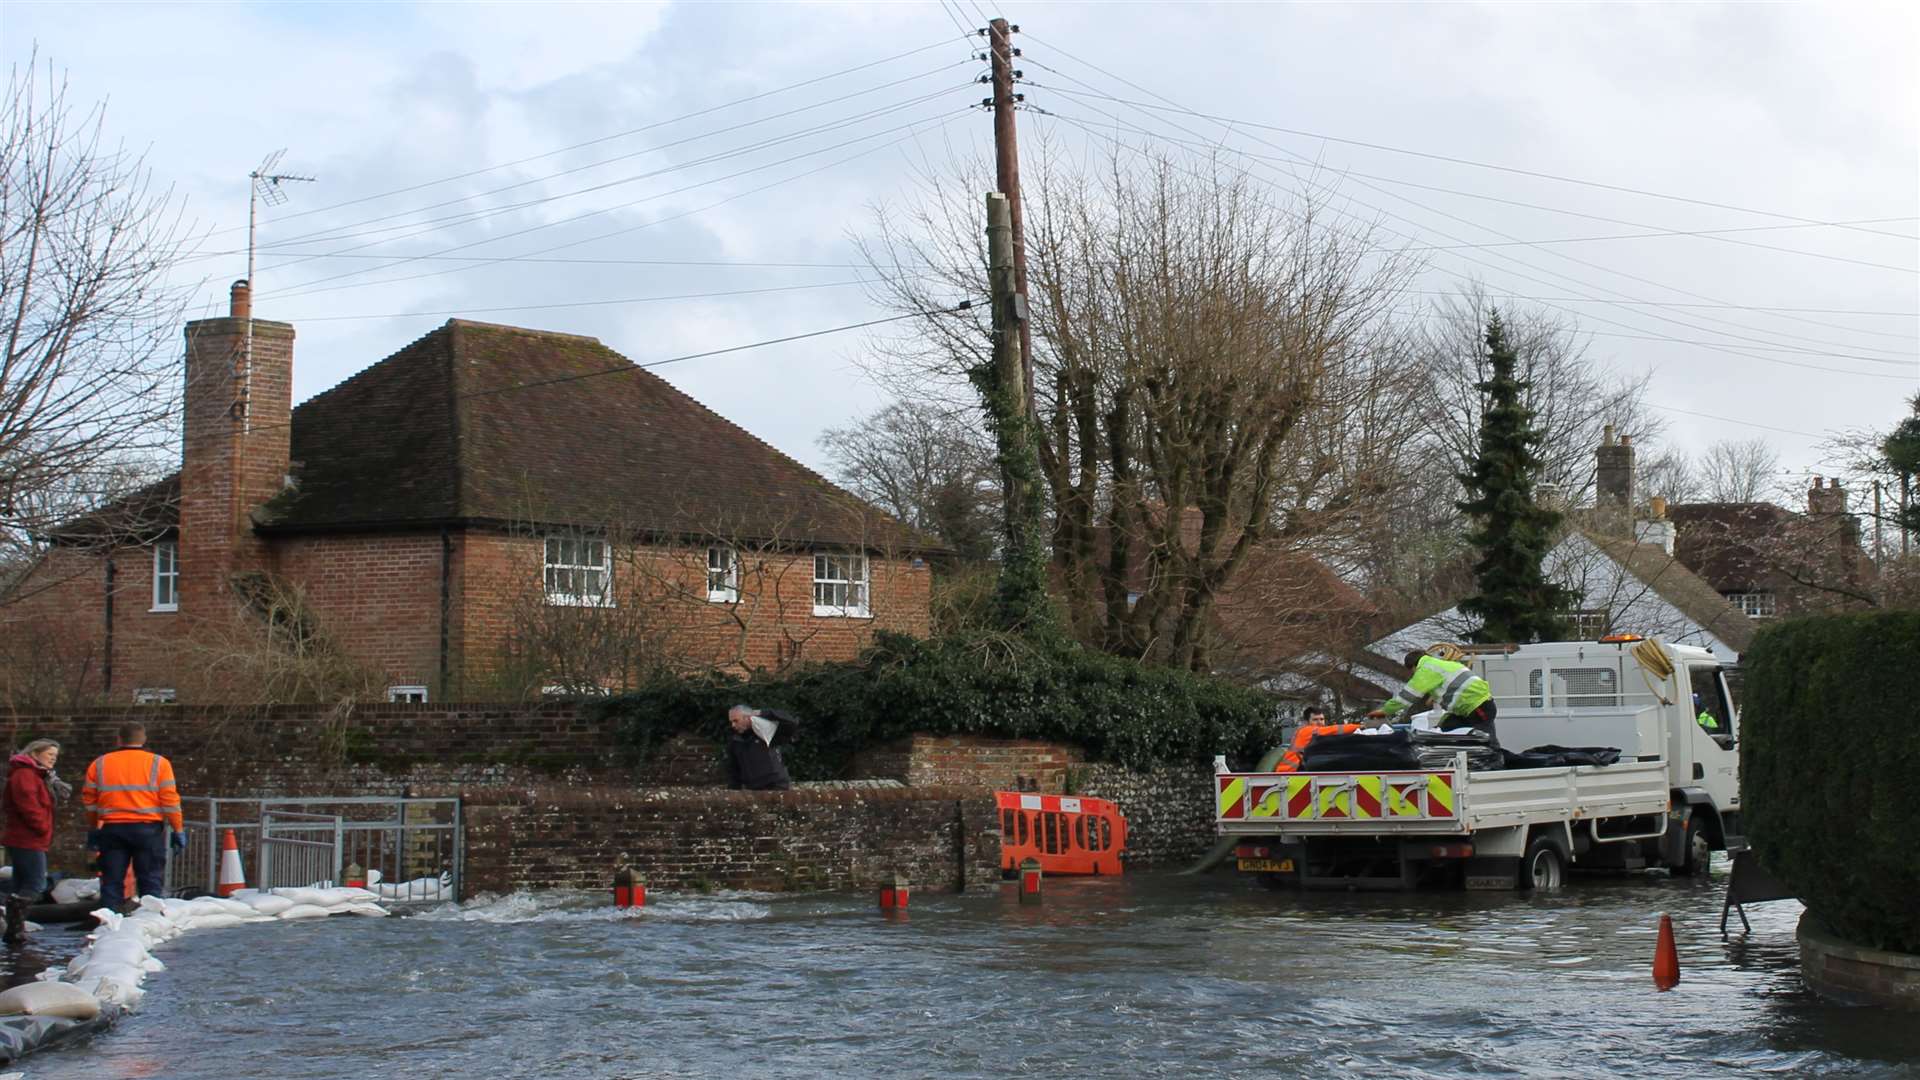 A wall of sandbags being built to try and hold back flood water, Barham. File picture